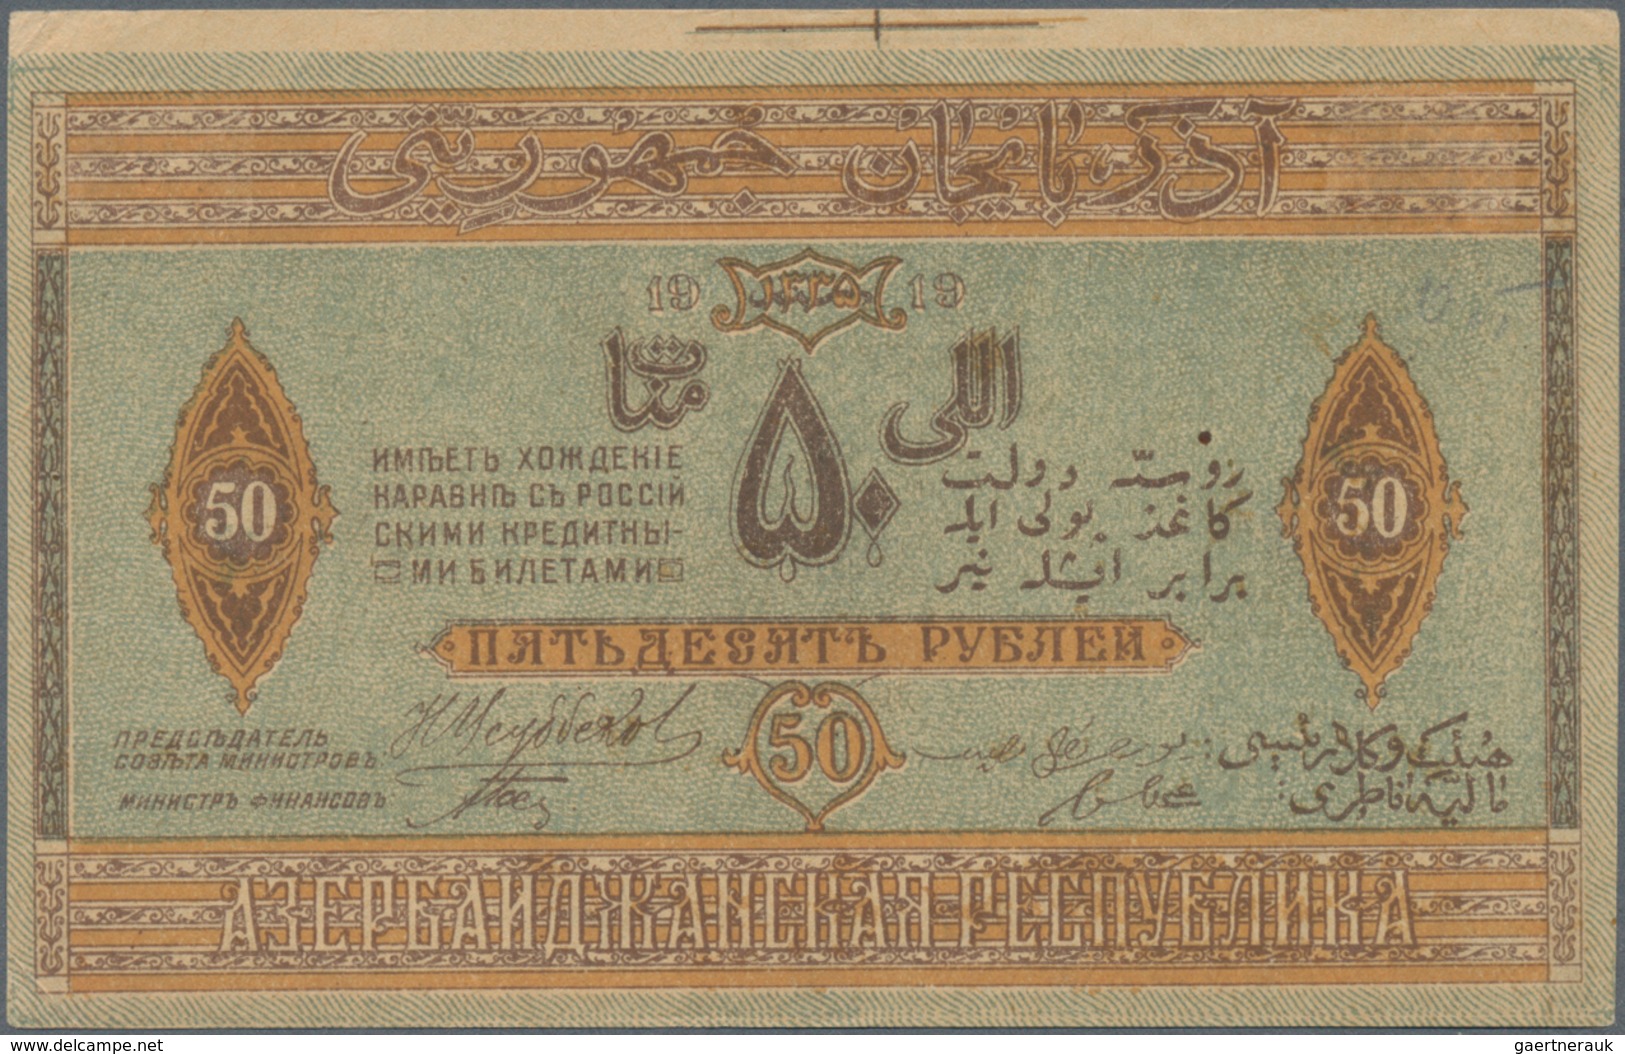 Azerbaijan / Aserbaidschan: Set with 4 banknotes 25, 50, 100 and 500 Rubles 1919, P.1, 2, 7, 9 in UN